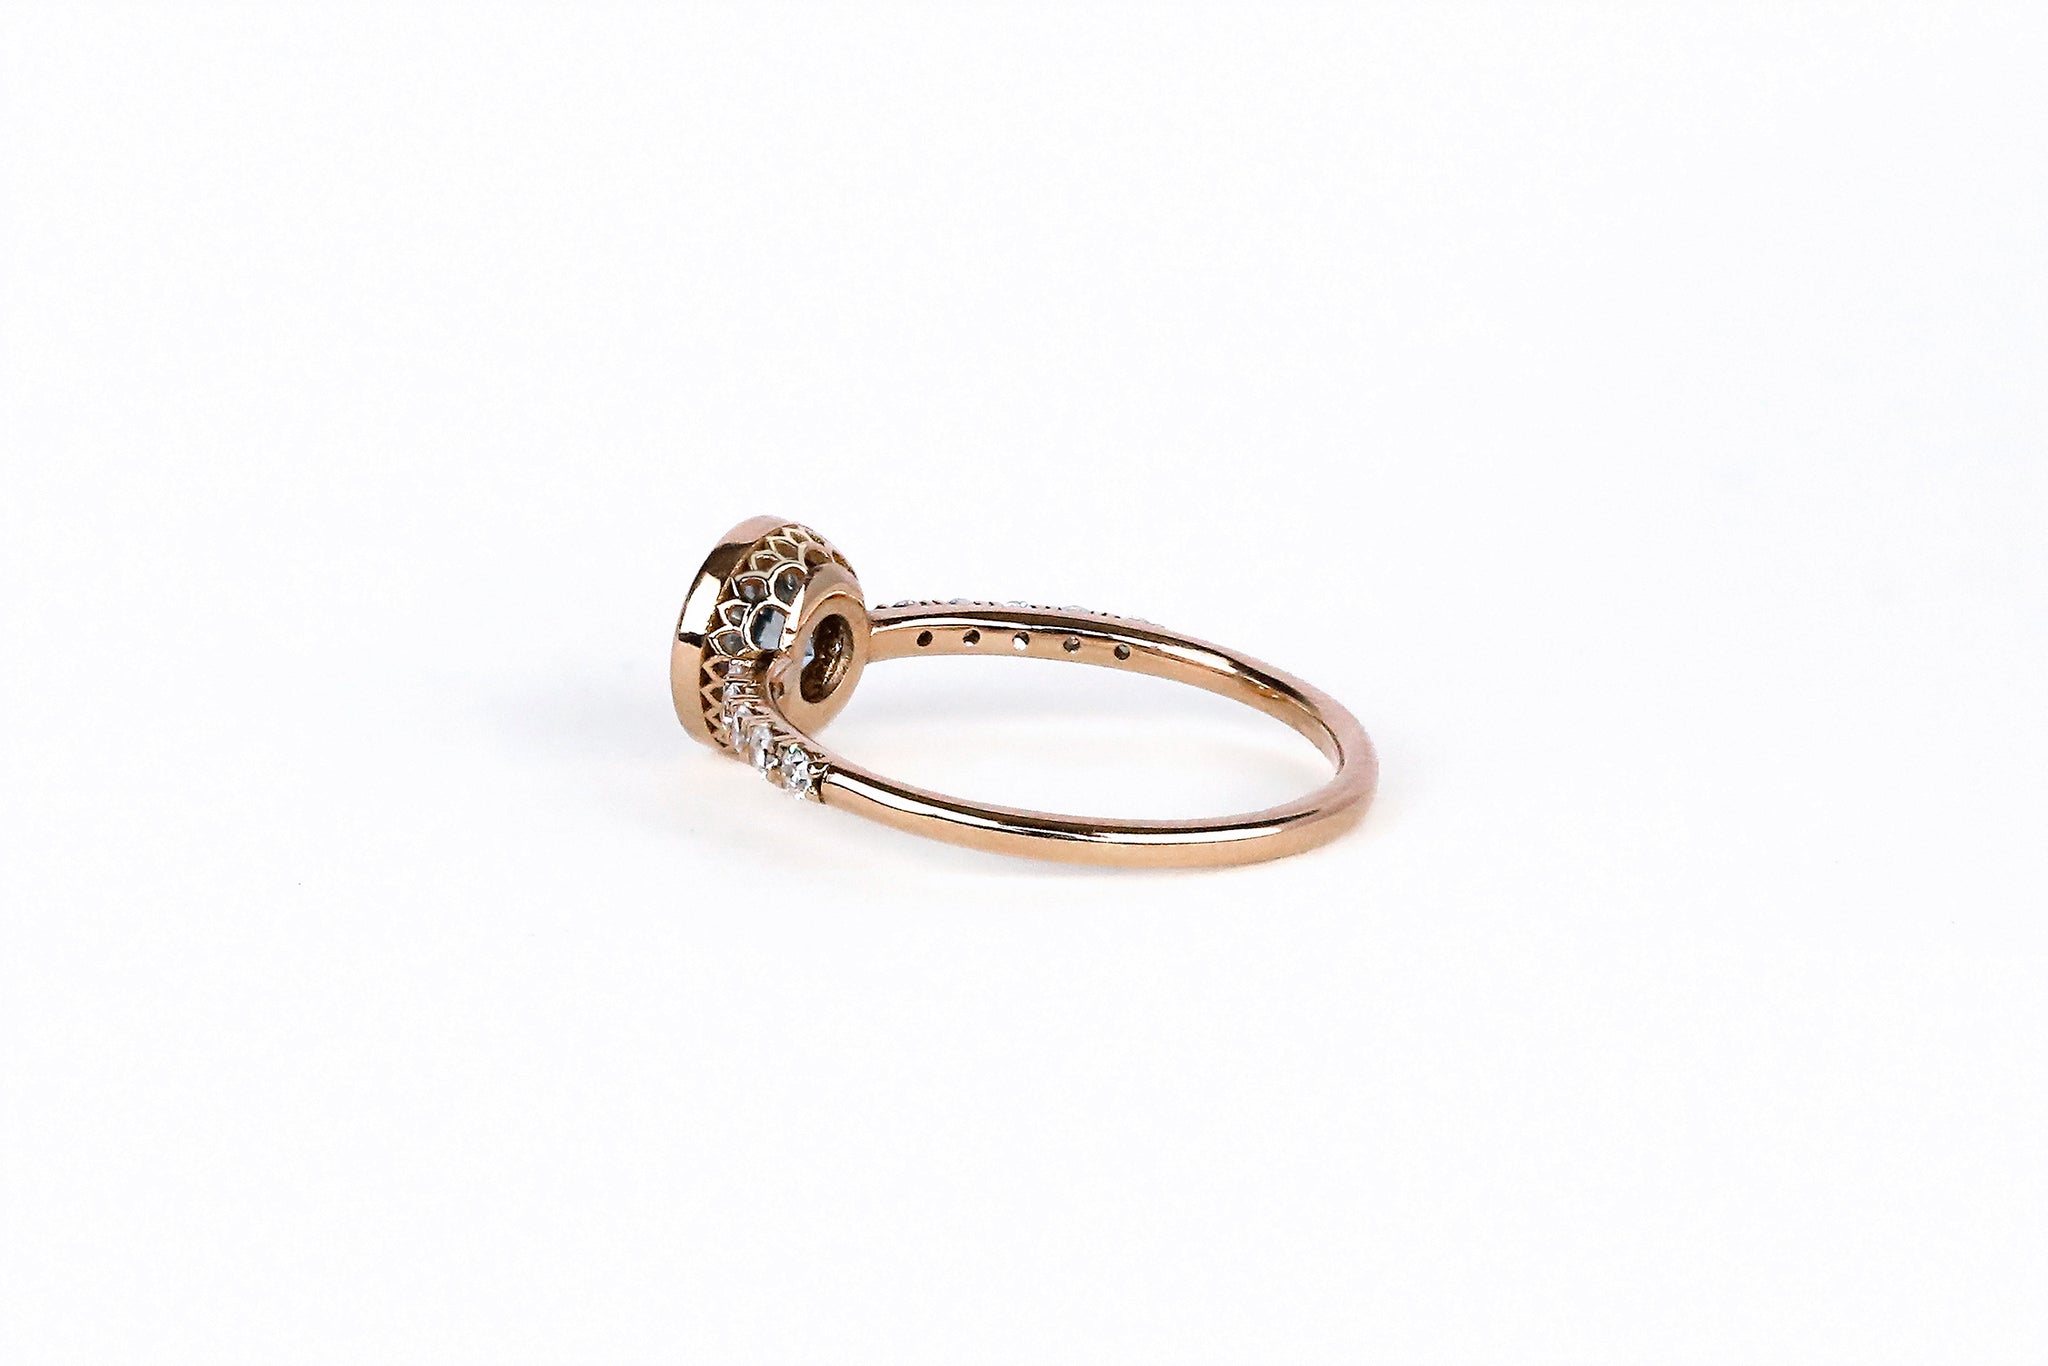 Lavender Montana Sapphire Lotus Maille Ring - S. Kind & Co